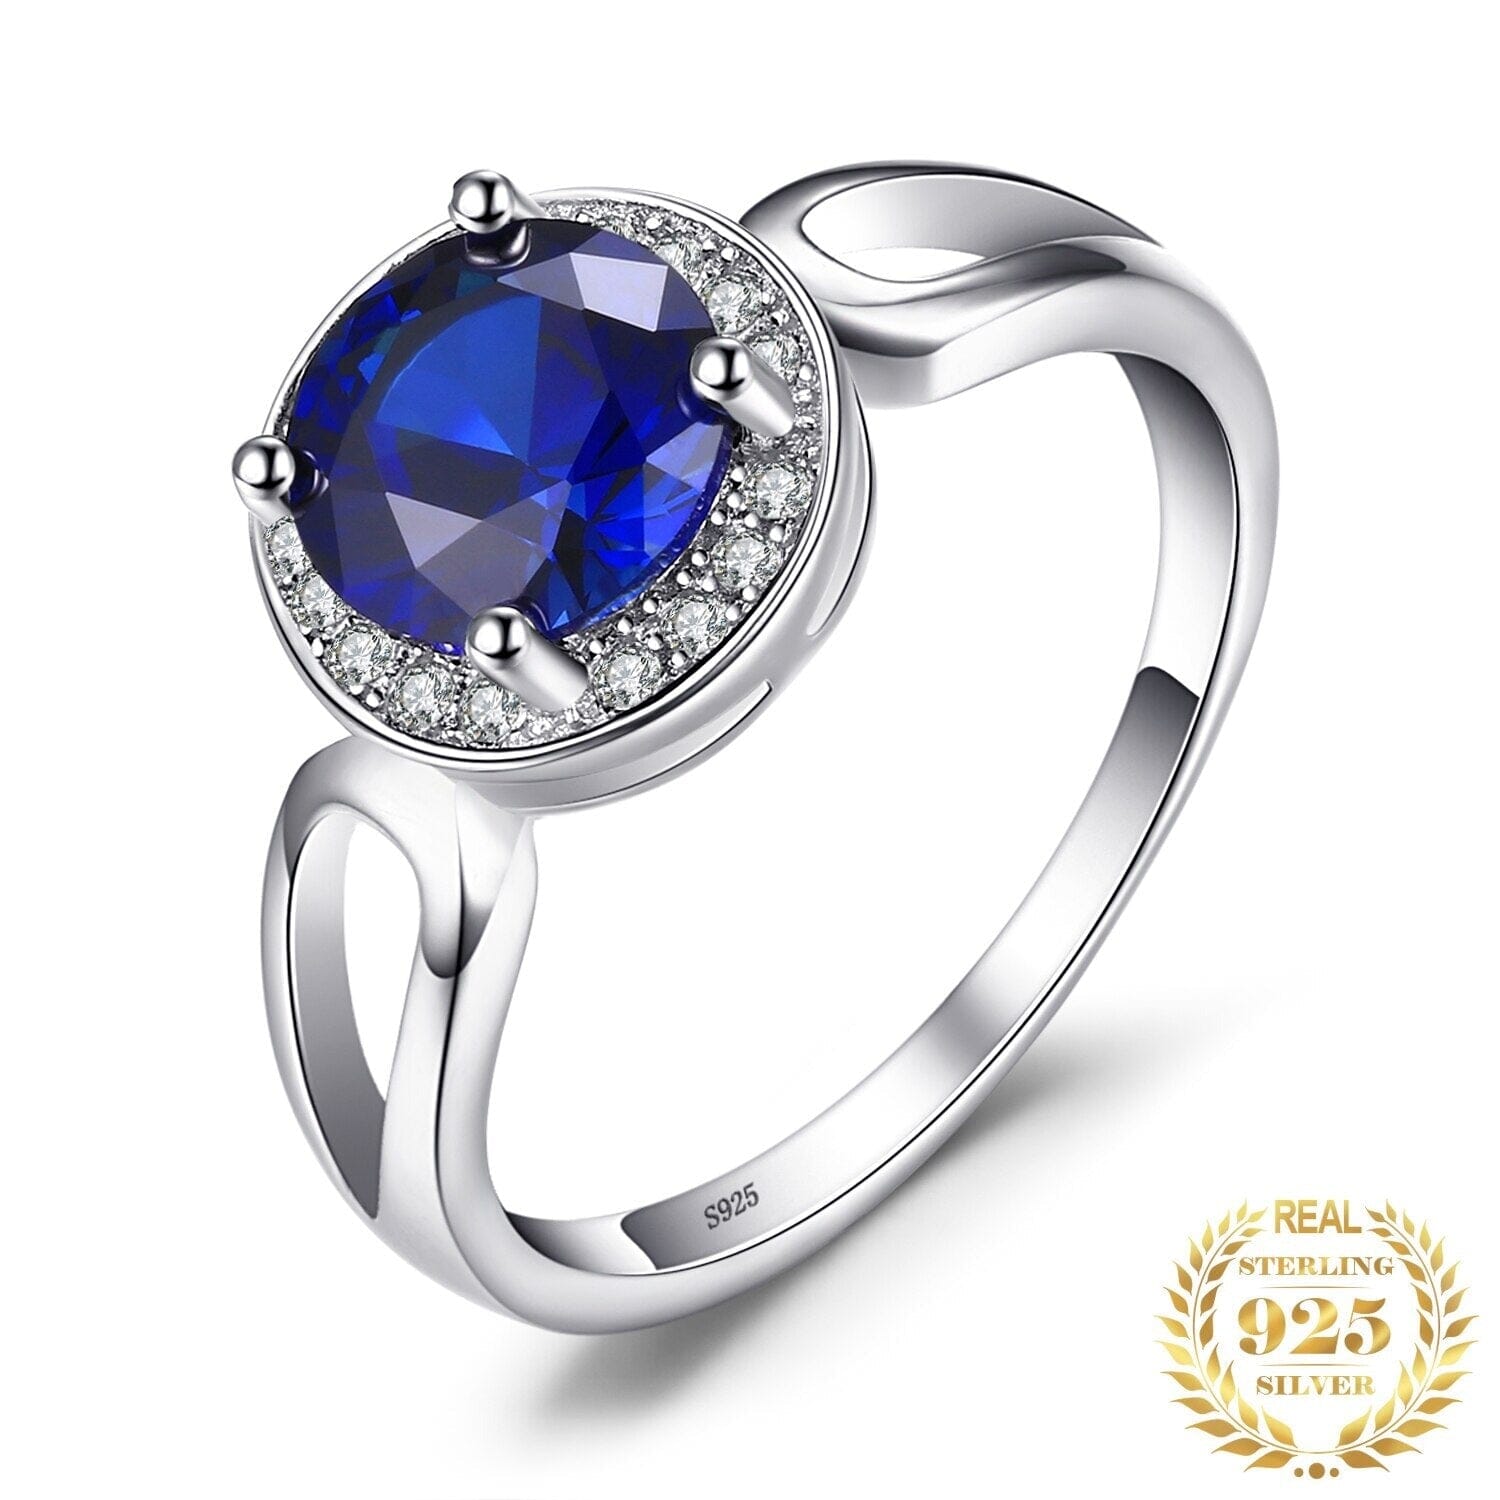 Fashion 1.8ct Created Blue Sapphire Halo Ring - 925 Sterling SilverRing6